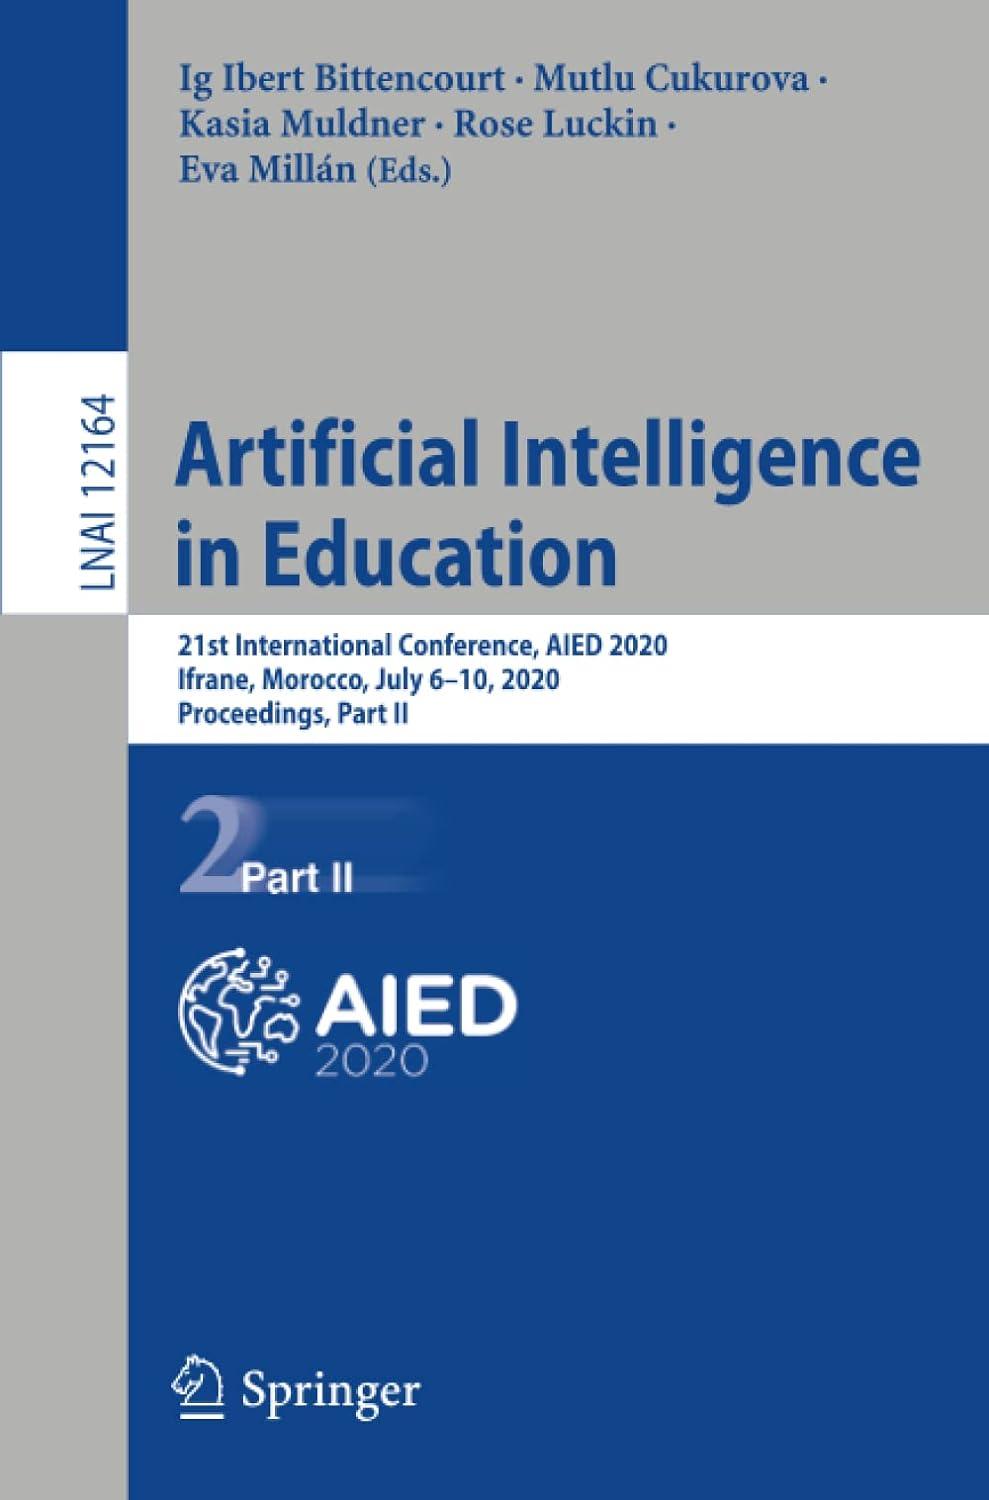 artificial intelligence in education 21st international conference aied 2020 ifrane morocco july 6-10 2020